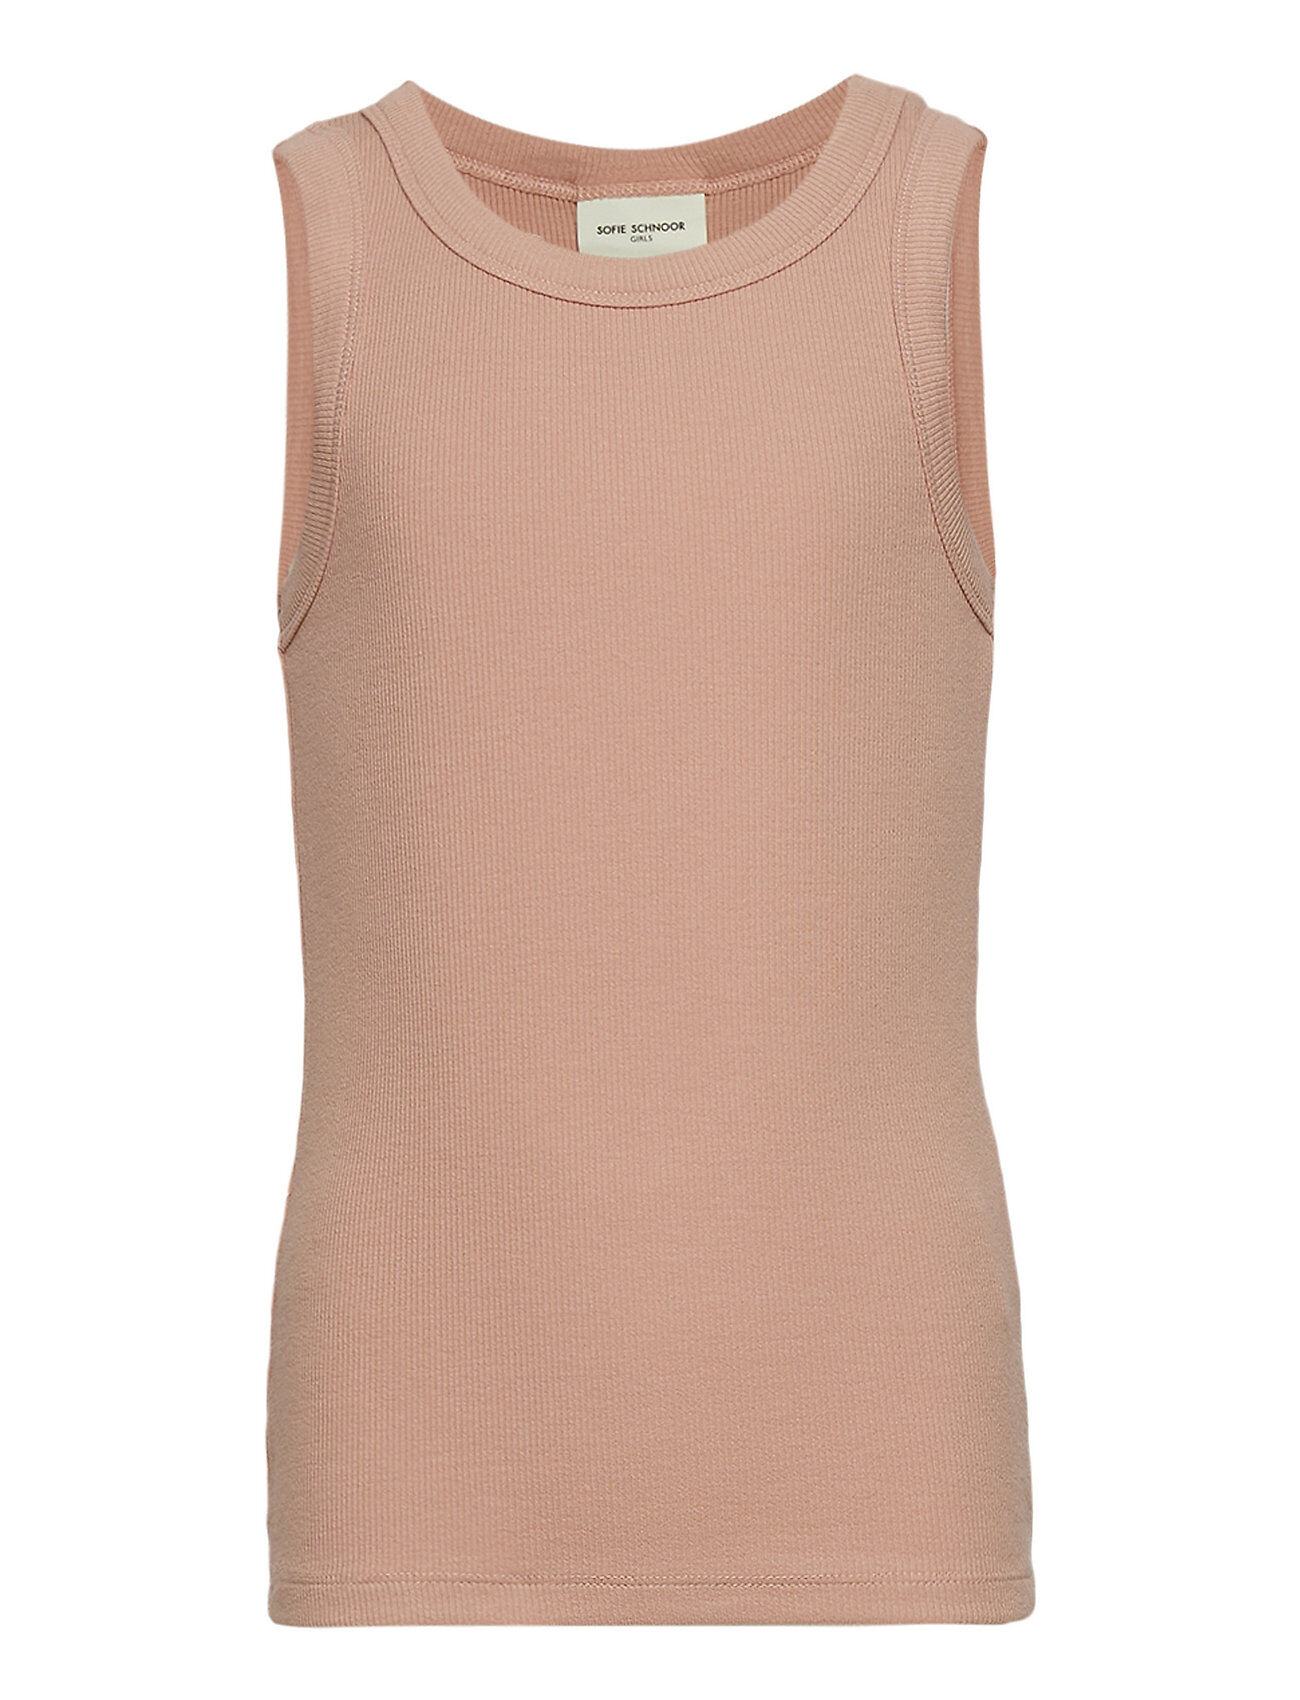 Petit by Sofie Schnoor Top T-shirts Sleeveless Beige Petit By Sofie Schnoor